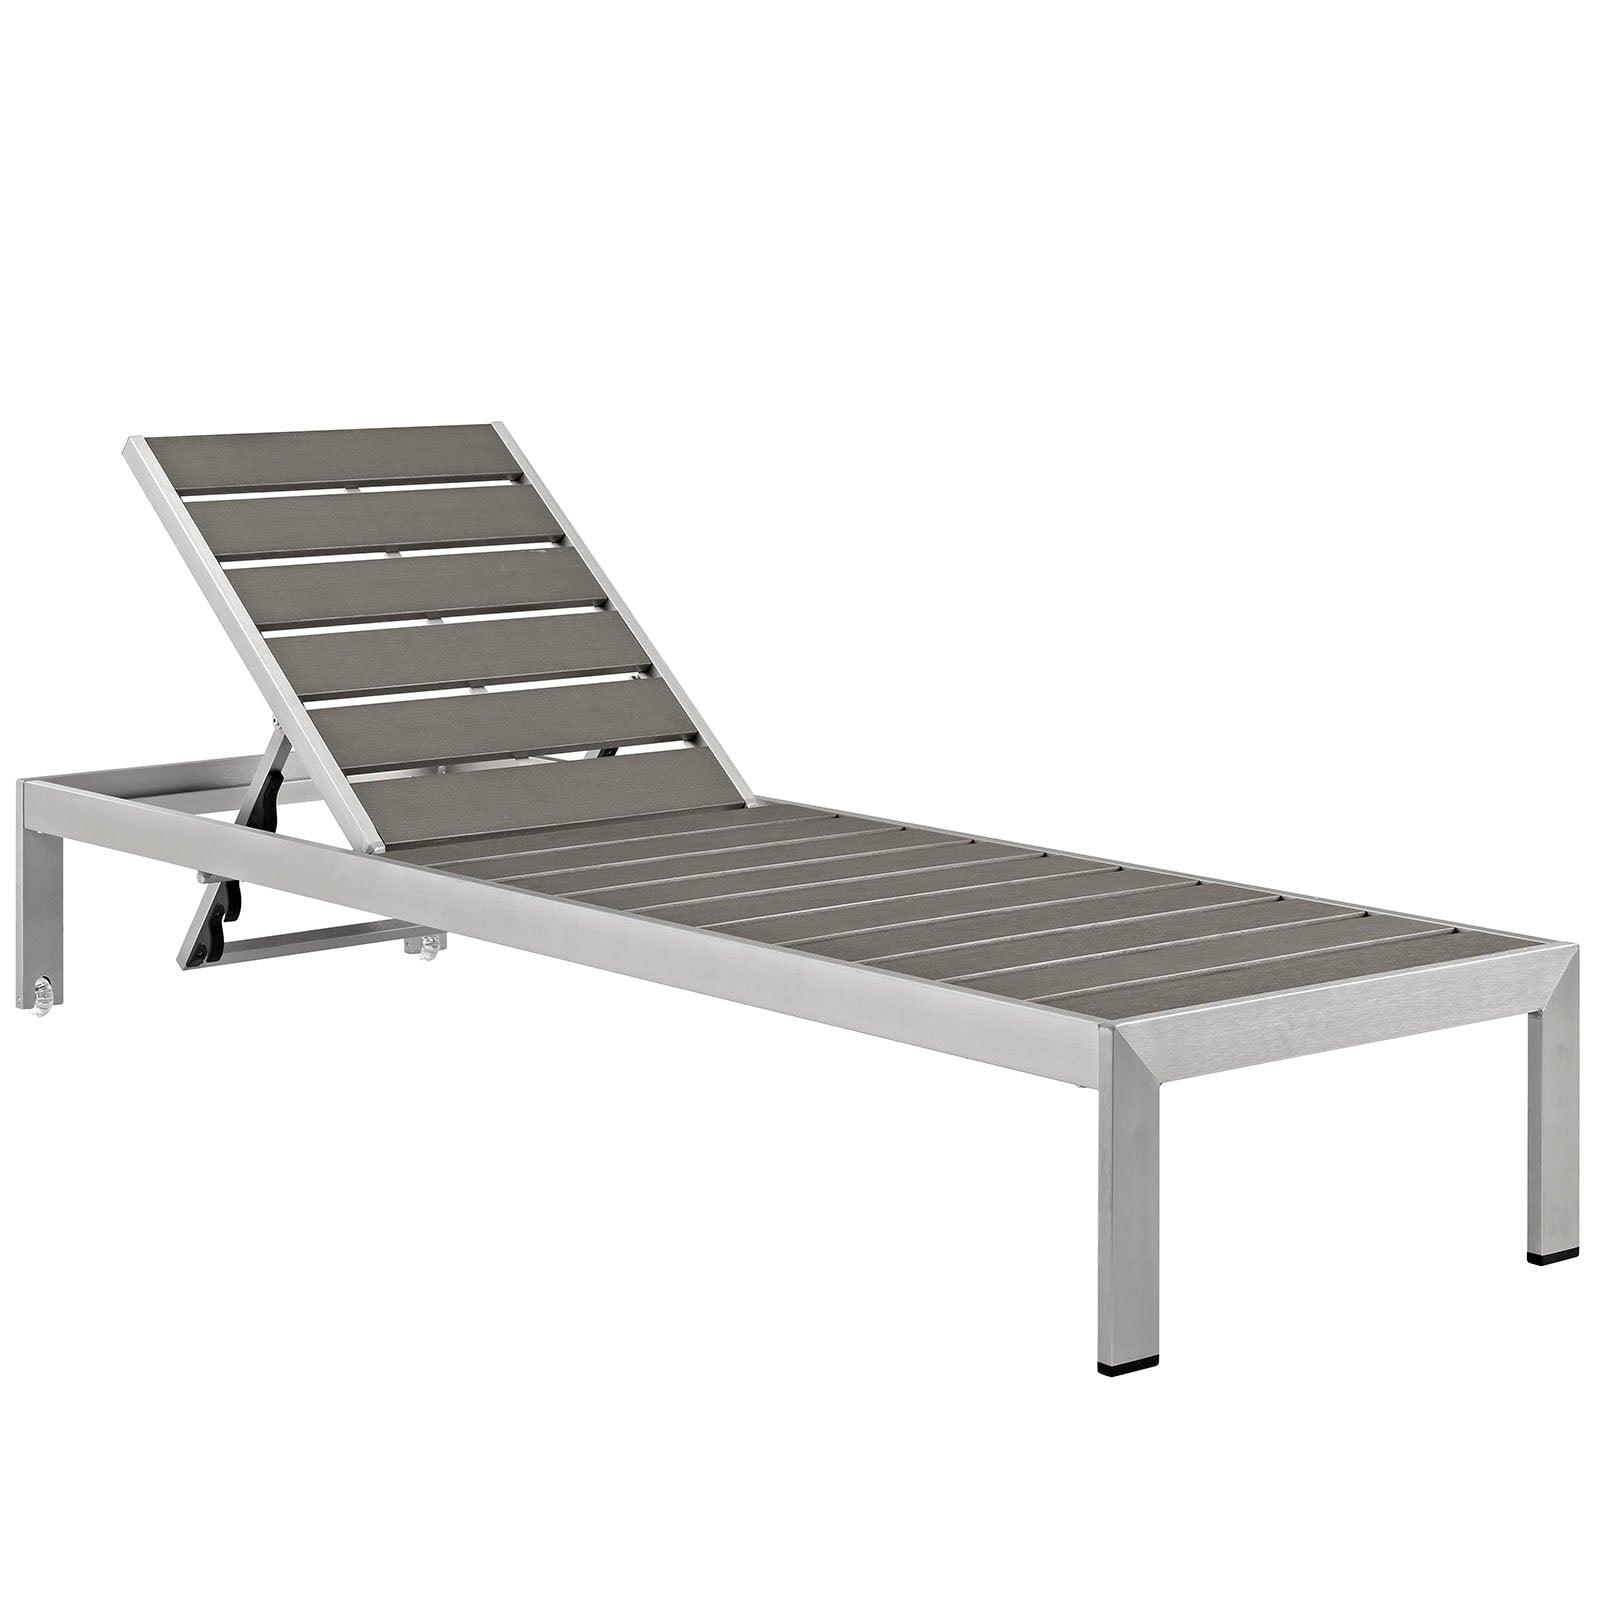 Modway Shore Chaise Outdoor Patio Aluminum Set of 4 FredCo